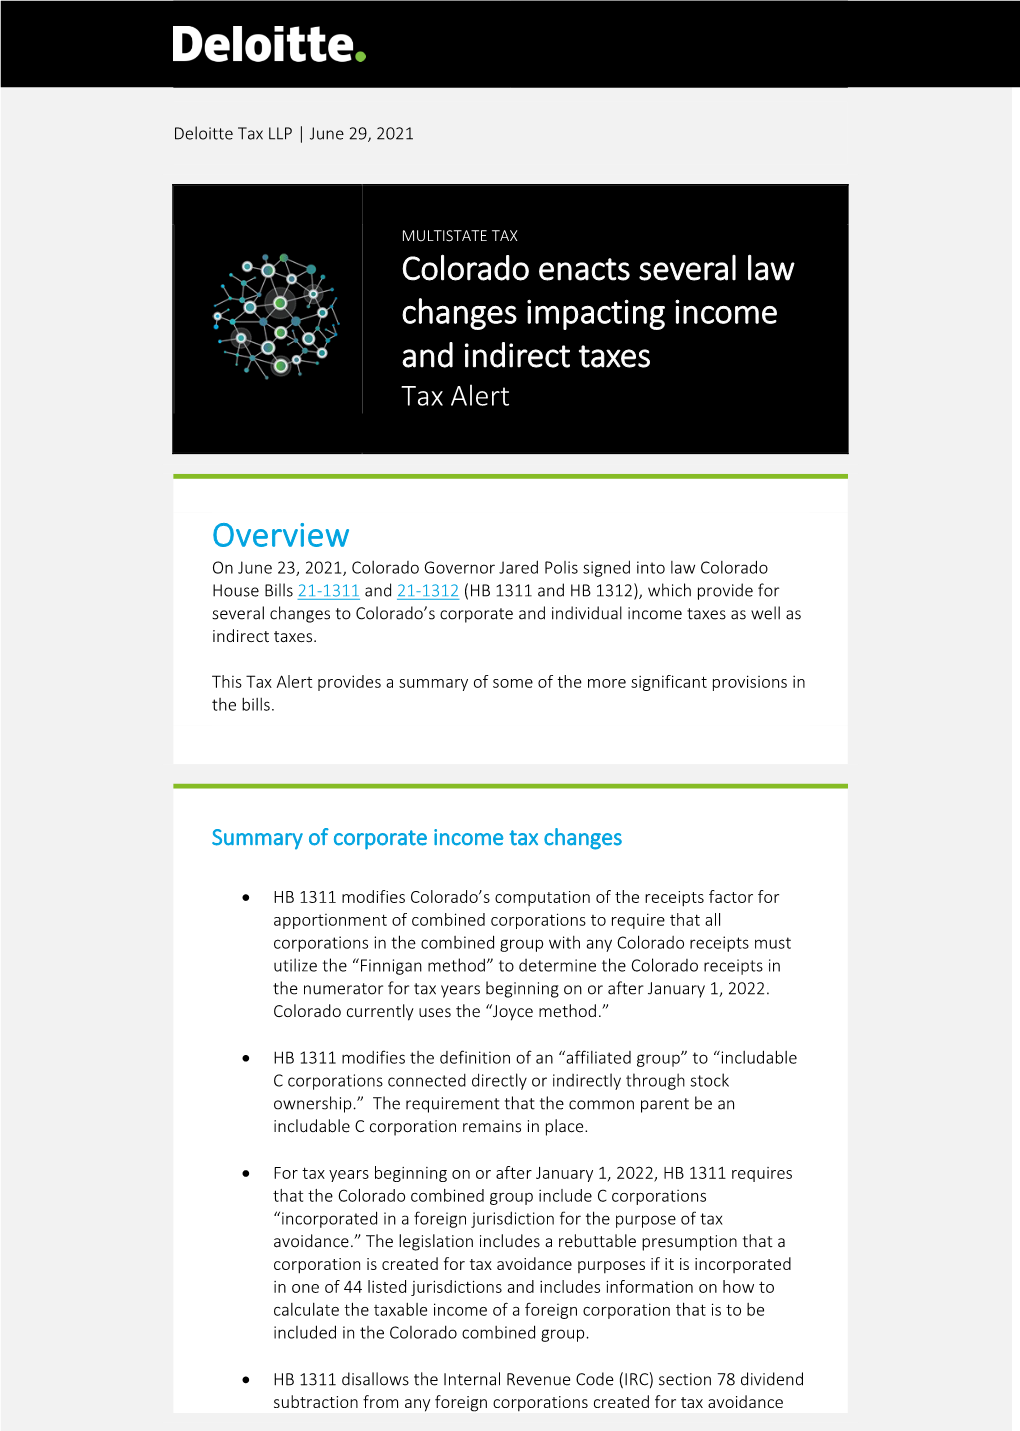 Colorado Enacts Several Law Changes Impacting Income and Indirect Taxes